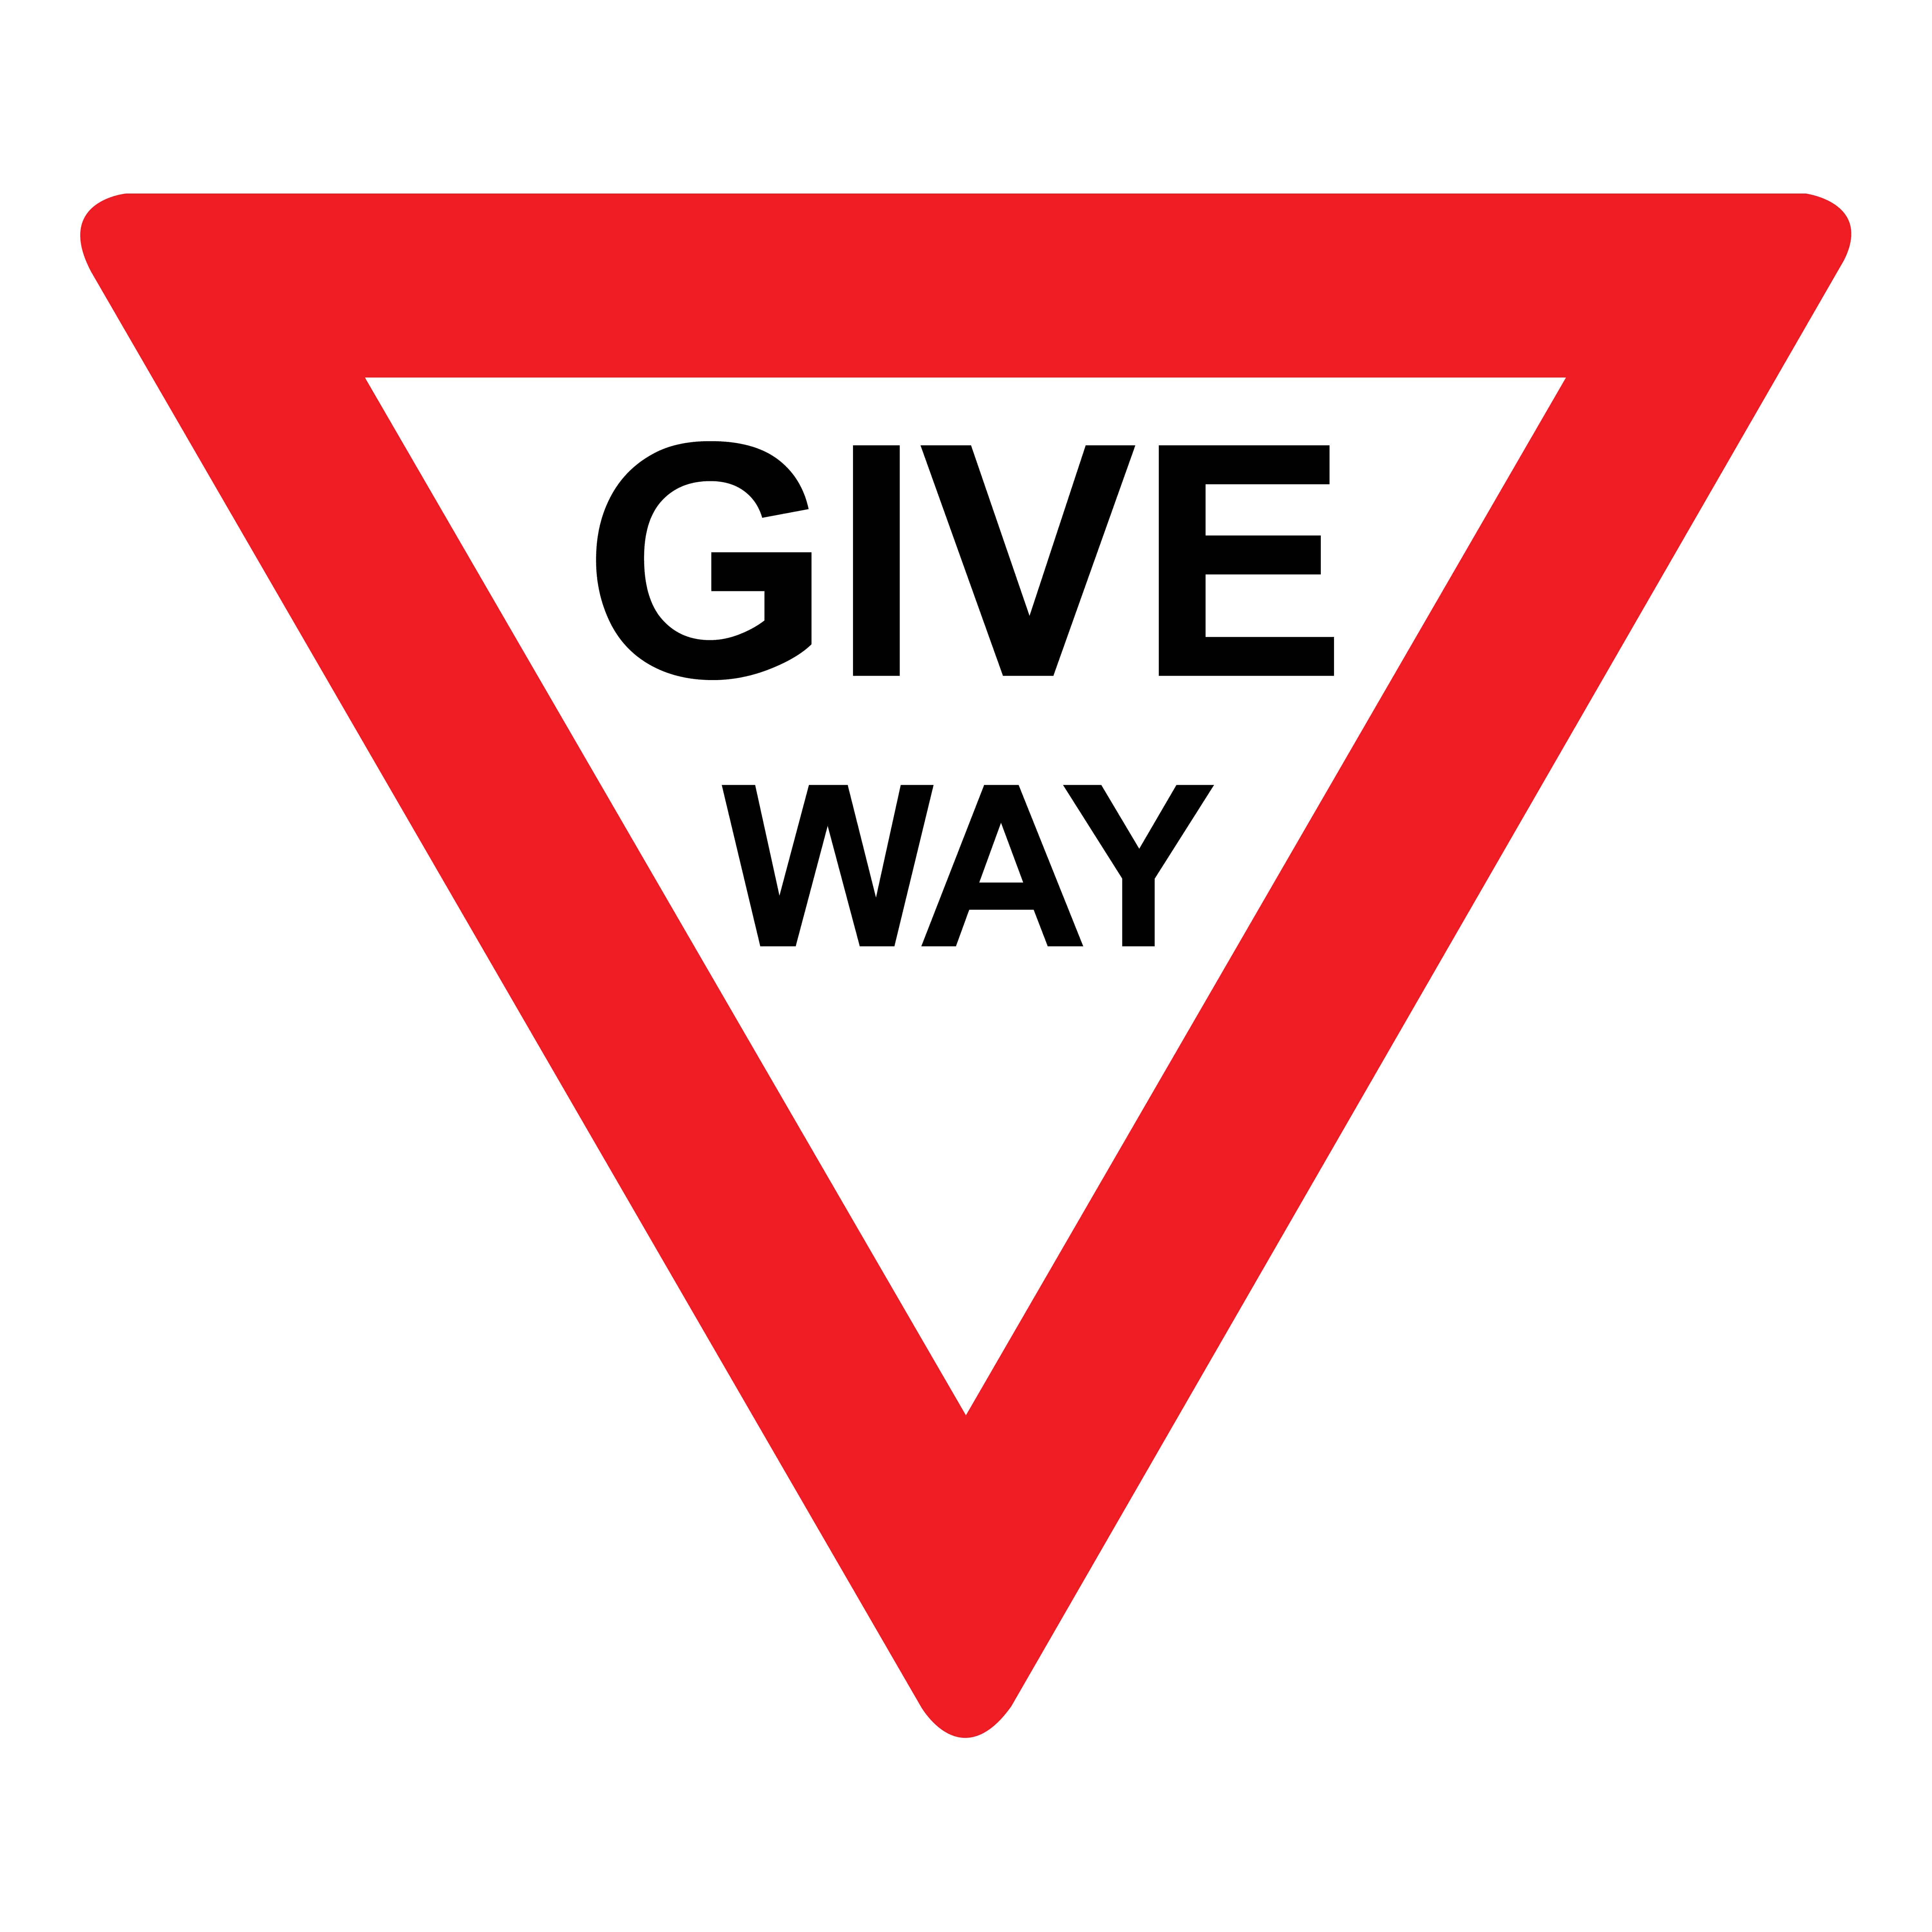 uk-road-signs-5-vital-things-to-learn-for-your-theory-test